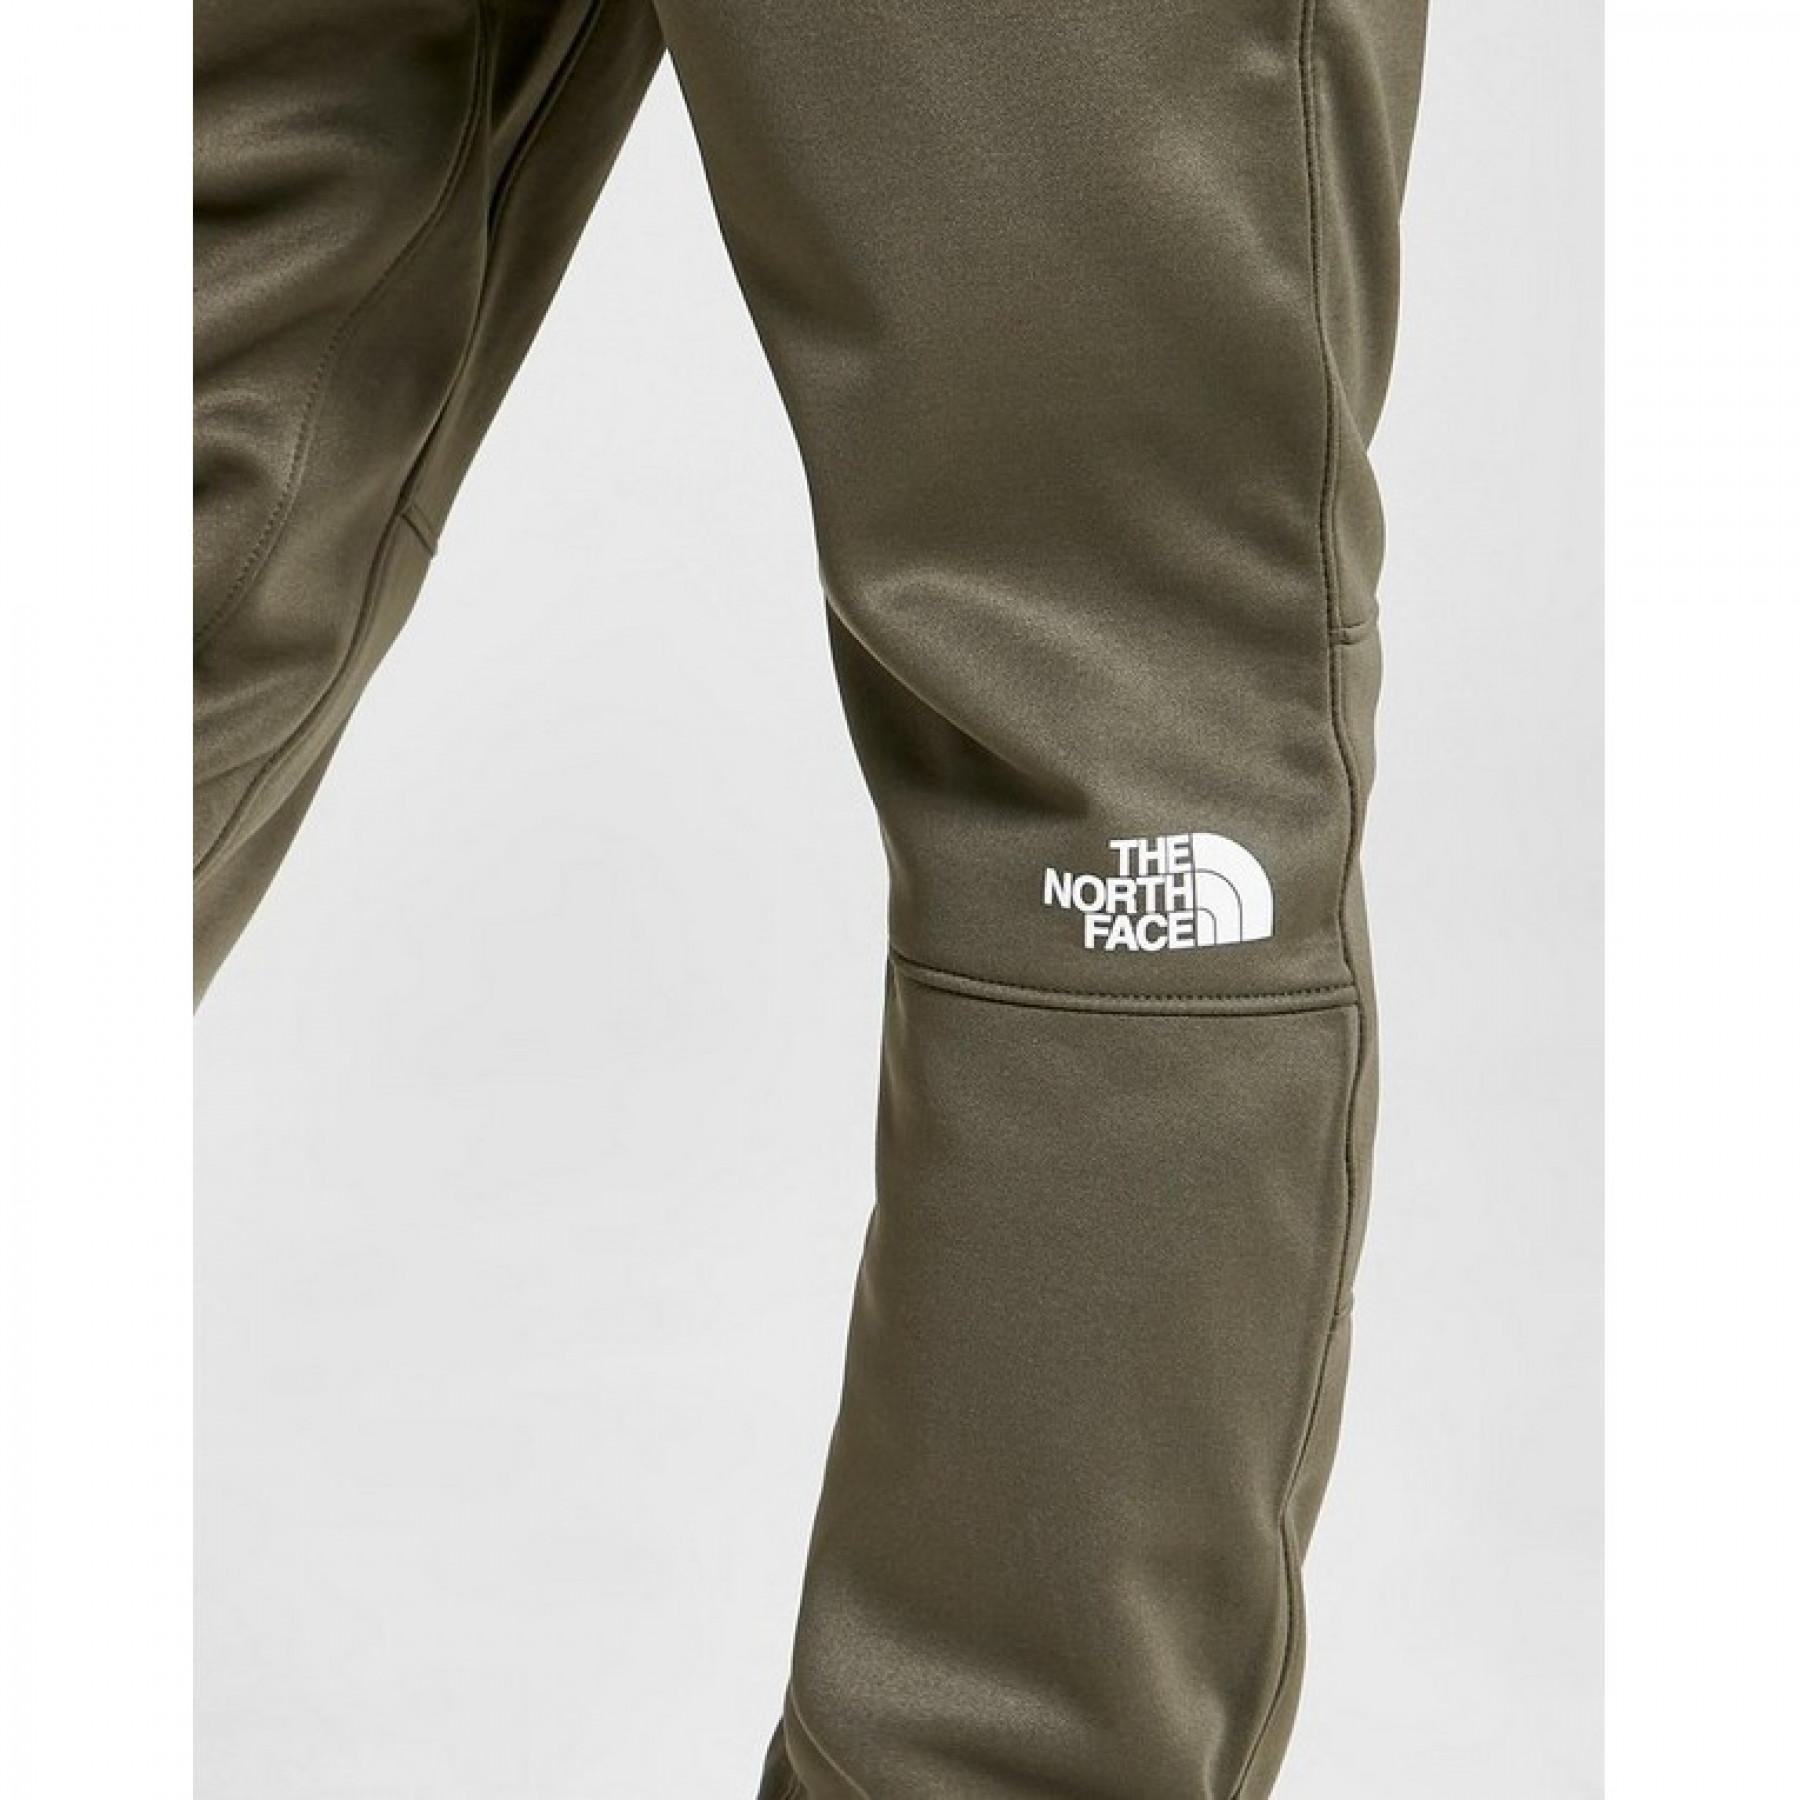 Children's trousers The North Face Surgent